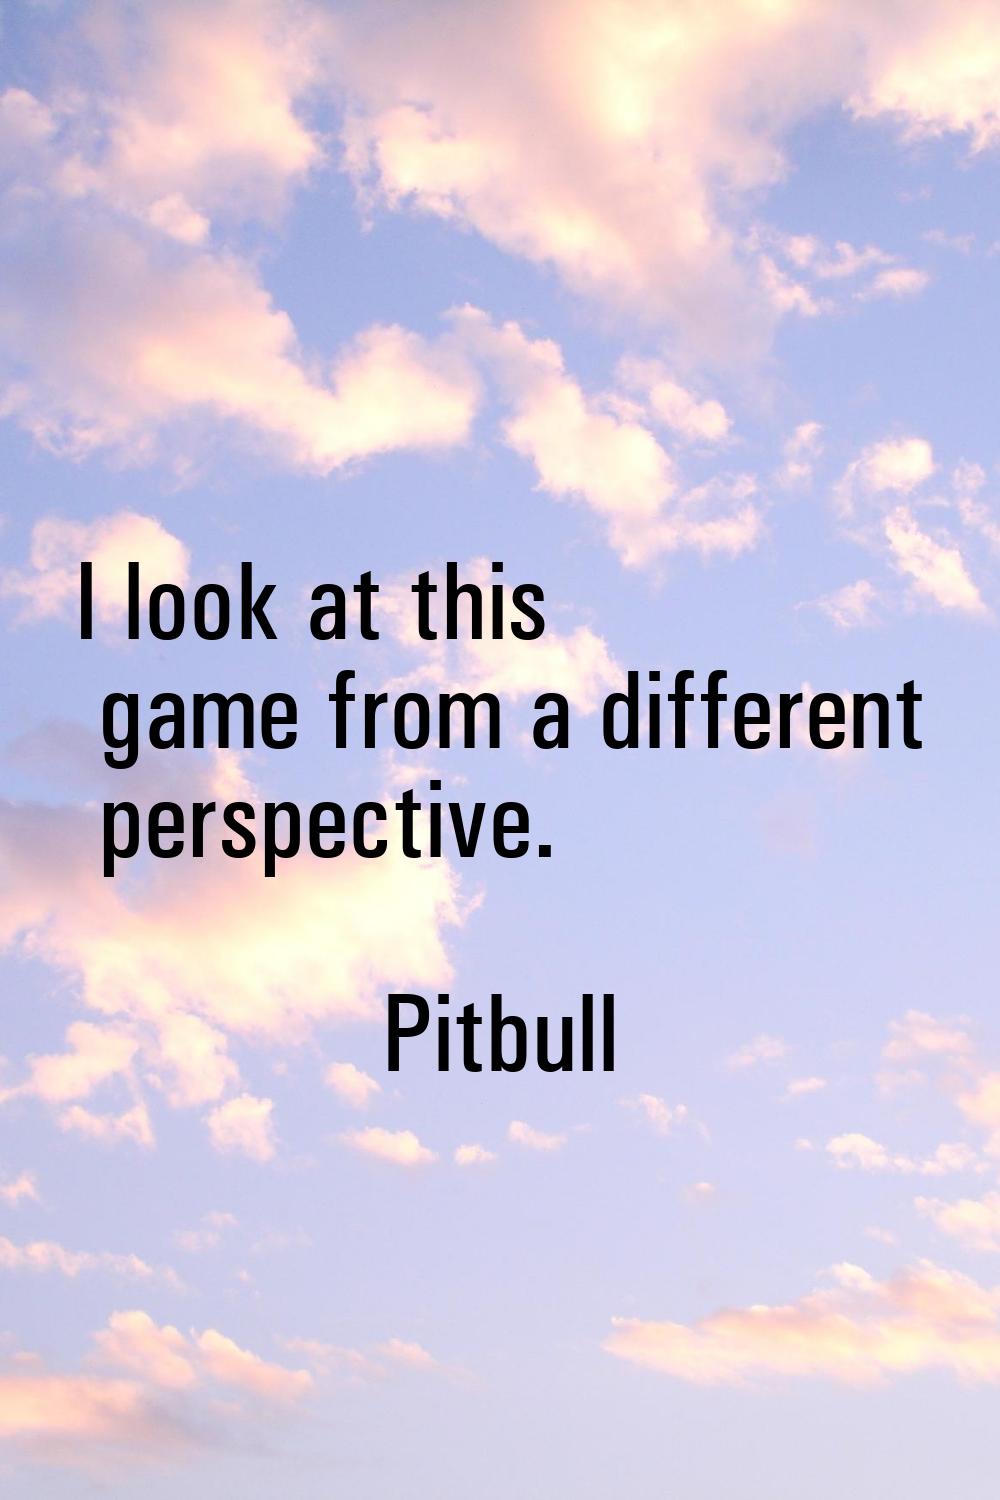 I look at this game from a different perspective.